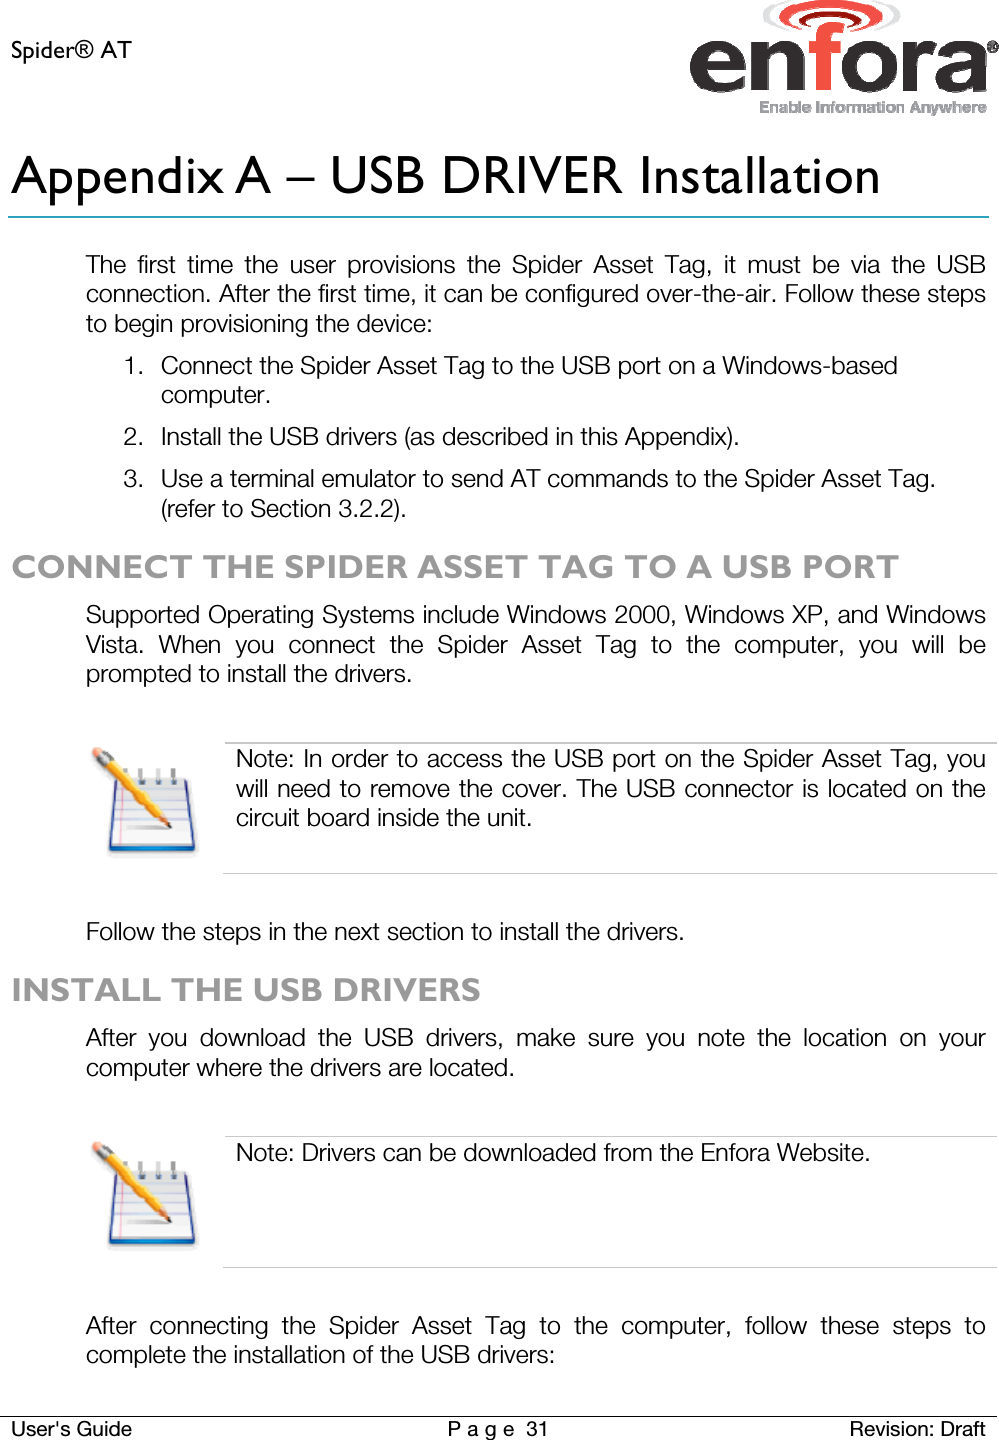 Spider® AT     User&apos;s Guide  P a g e 31 Revision: Draft Appendix A – USB DRIVER Installation The first time the user provisions the Spider Asset Tag, it must be via the USB connection. After the first time, it can be configured over-the-air. Follow these steps to begin provisioning the device: 1. Connect the Spider Asset Tag to the USB port on a Windows-based computer. 2. Install the USB drivers (as described in this Appendix). 3. Use a terminal emulator to send AT commands to the Spider Asset Tag. (refer to Section 3.2.2). CONNECT THE SPIDER ASSET TAG TO A USB PORT Supported Operating Systems include Windows 2000, Windows XP, and Windows Vista. When you connect the Spider Asset Tag to the computer, you will be prompted to install the drivers.    Note: In order to access the USB port on the Spider Asset Tag, you will need to remove the cover. The USB connector is located on the circuit board inside the unit.  Follow the steps in the next section to install the drivers. INSTALL THE USB DRIVERS After you download the USB drivers, make sure you note the location on your computer where the drivers are located.   Note: Drivers can be downloaded from the Enfora Website.  After connecting the Spider Asset Tag to the computer, follow these steps to complete the installation of the USB drivers: 